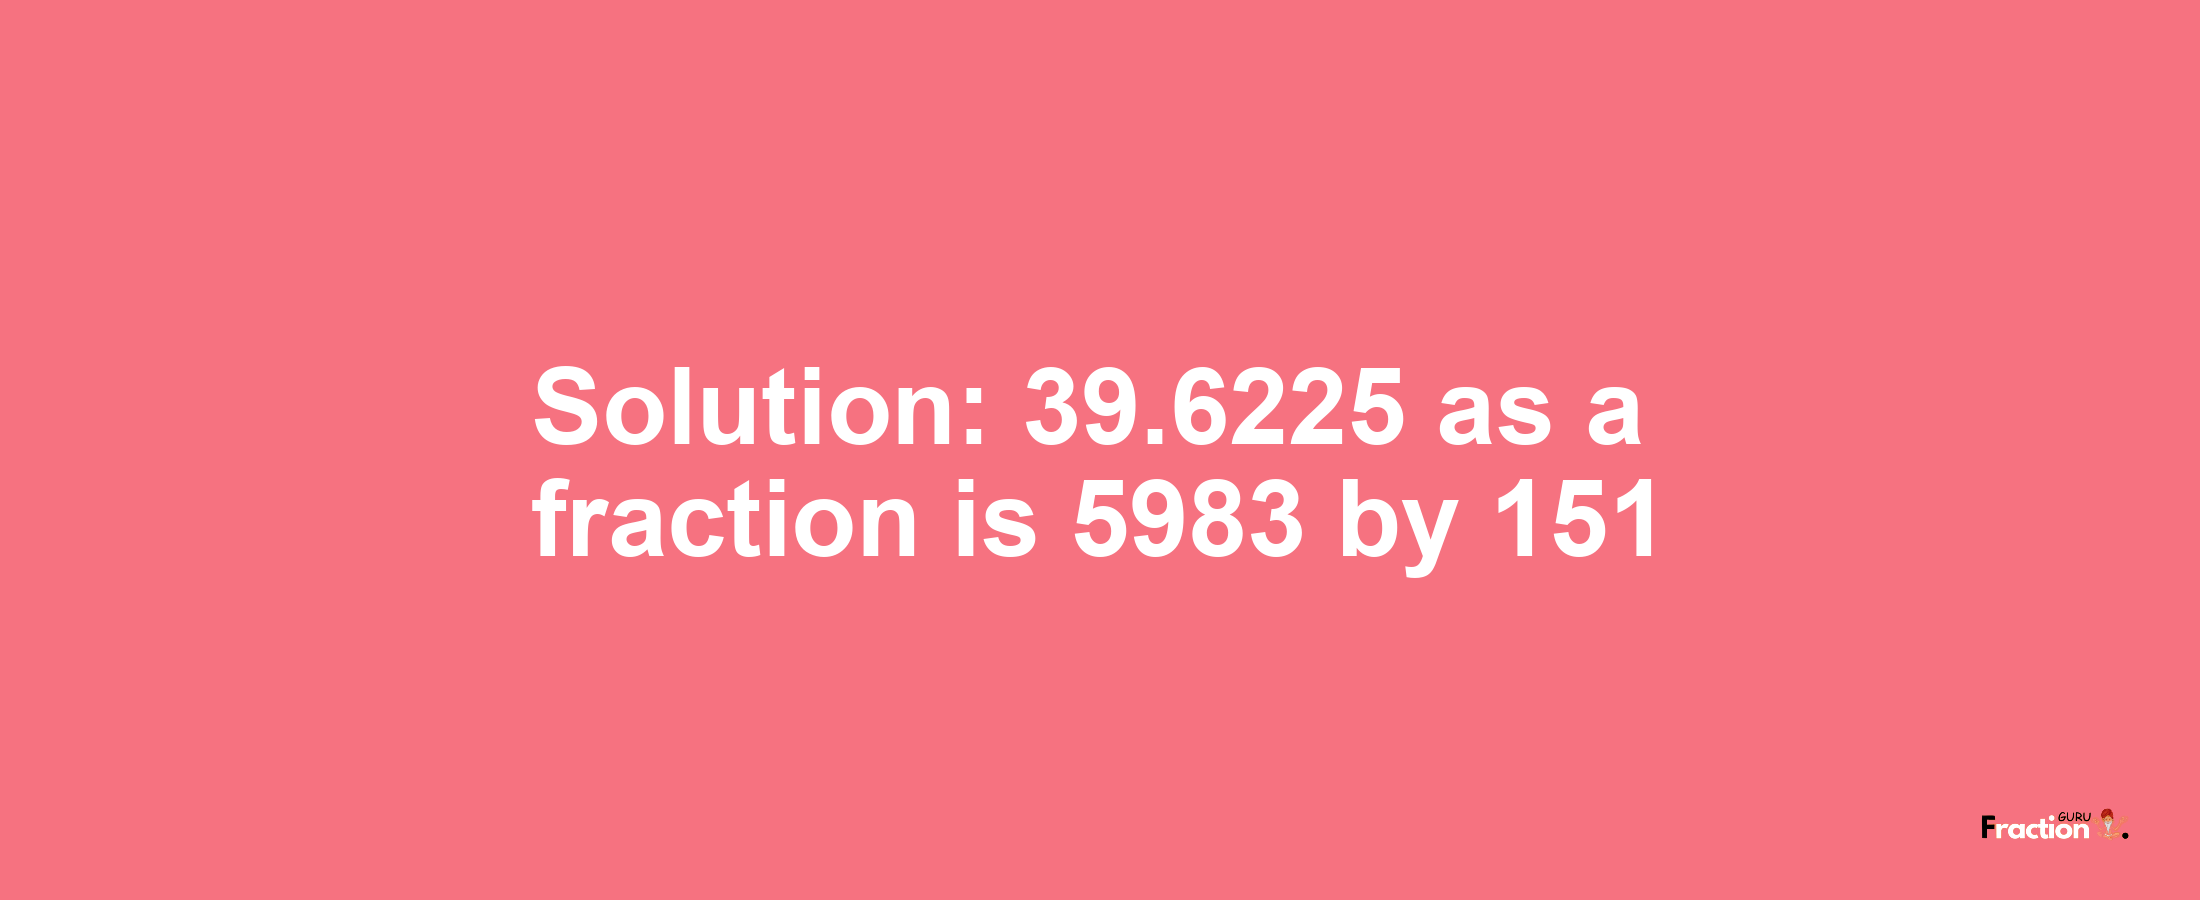 Solution:39.6225 as a fraction is 5983/151